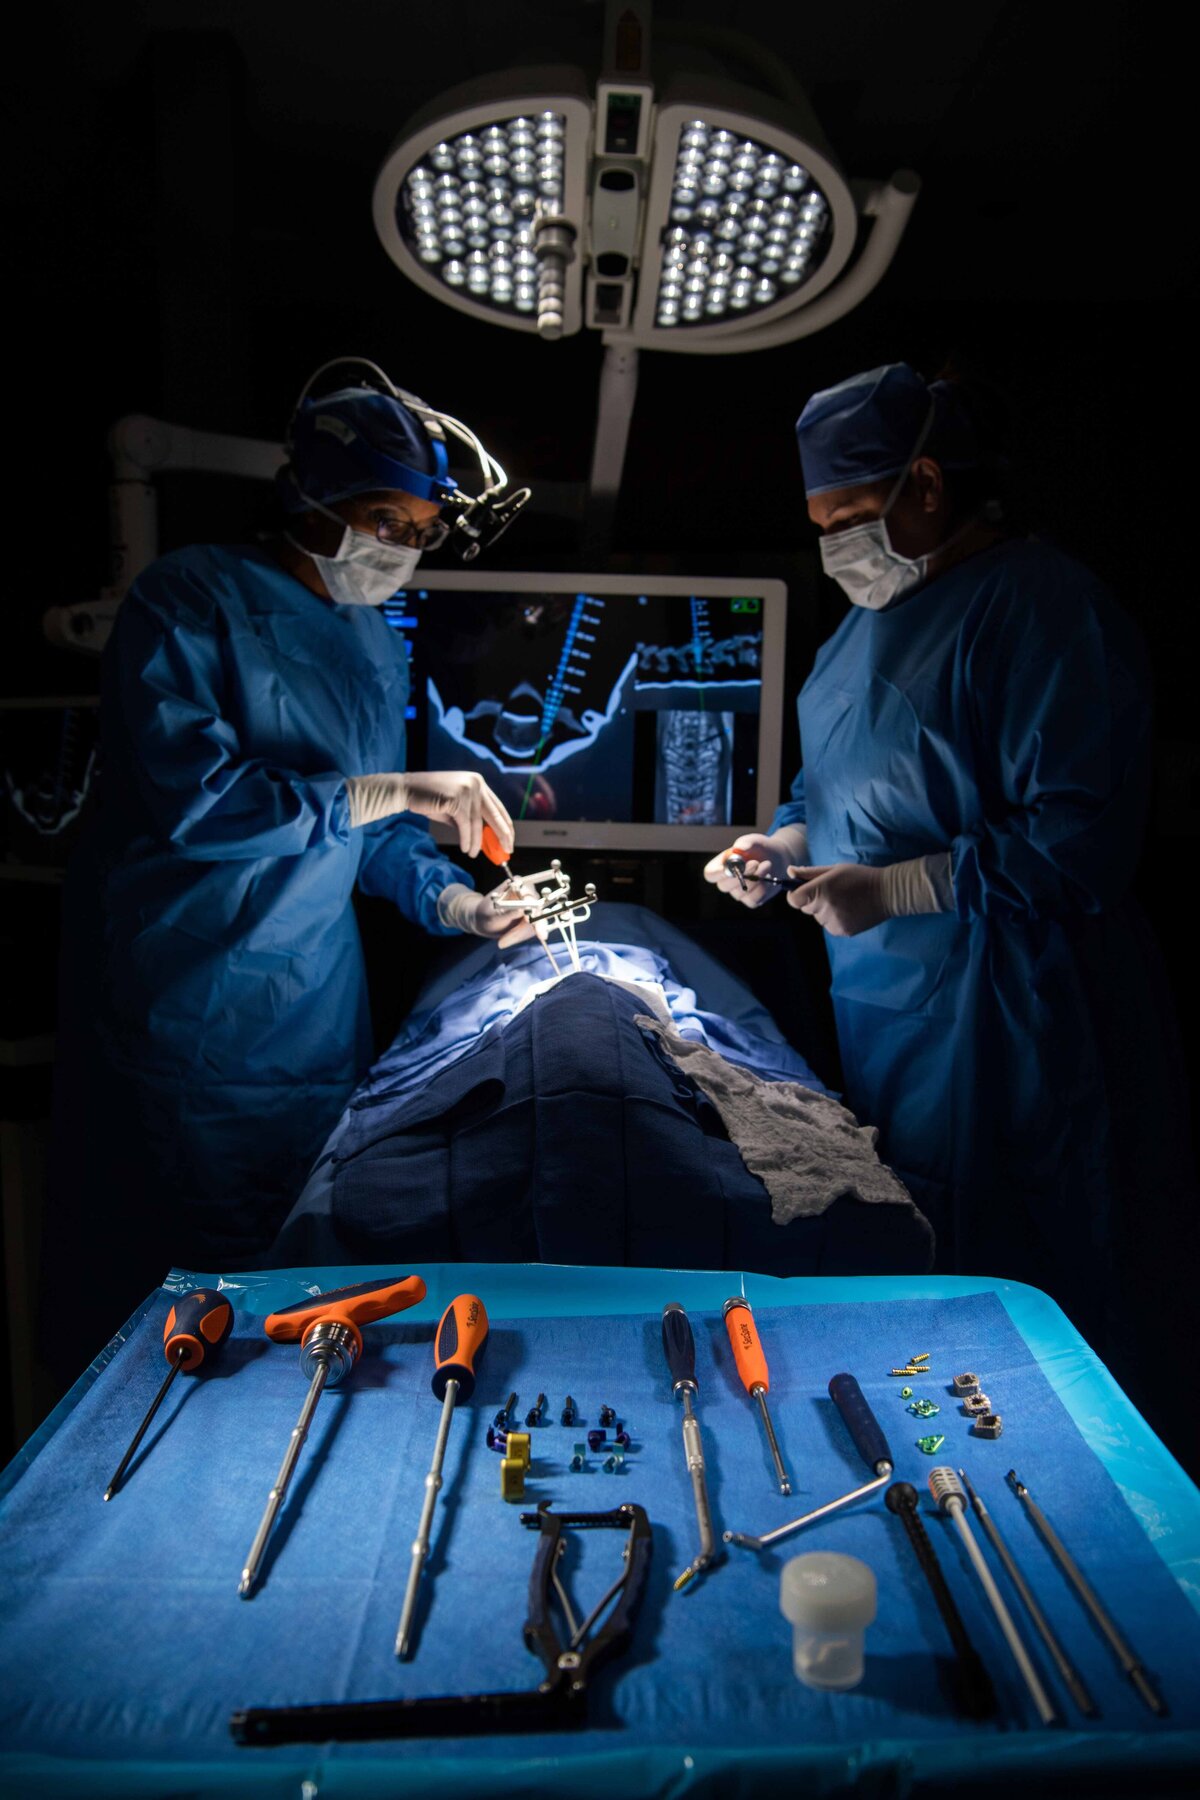 Seaspine surgical solutions photo with surgeons using Seaspine tools